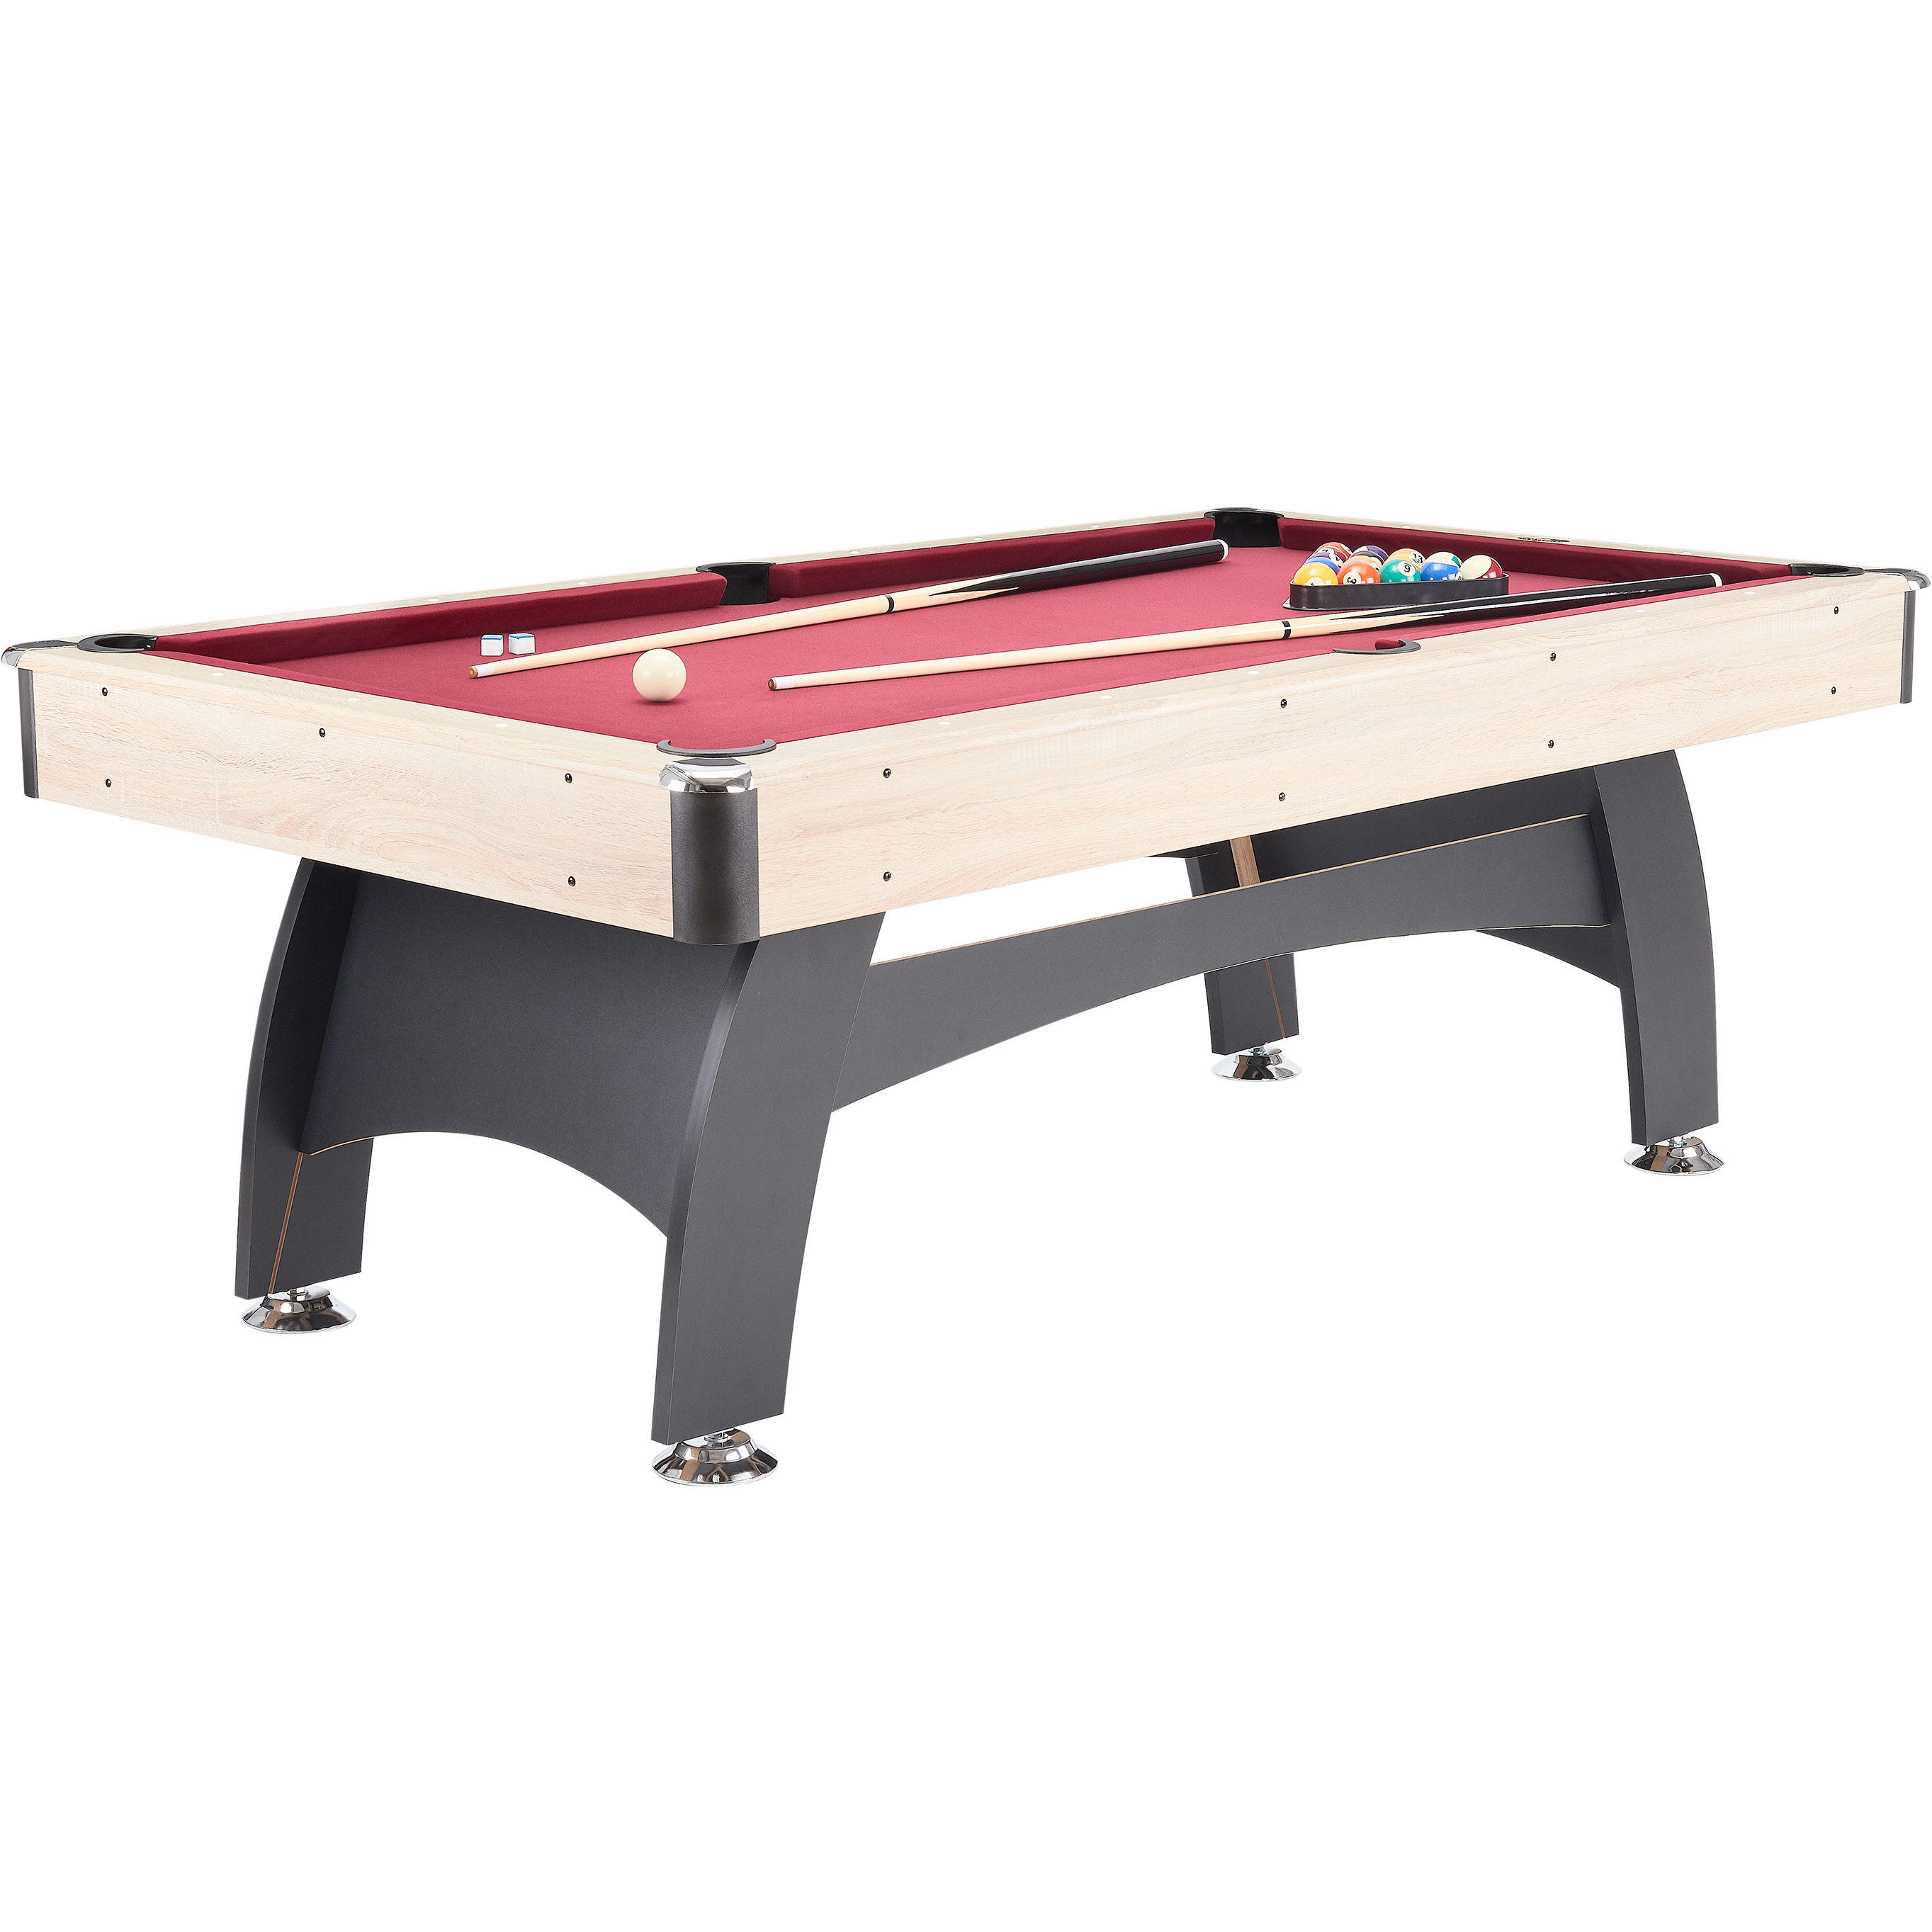 Airzone 84" Pool Table with Accessories, Red Felt - image 1 of 4